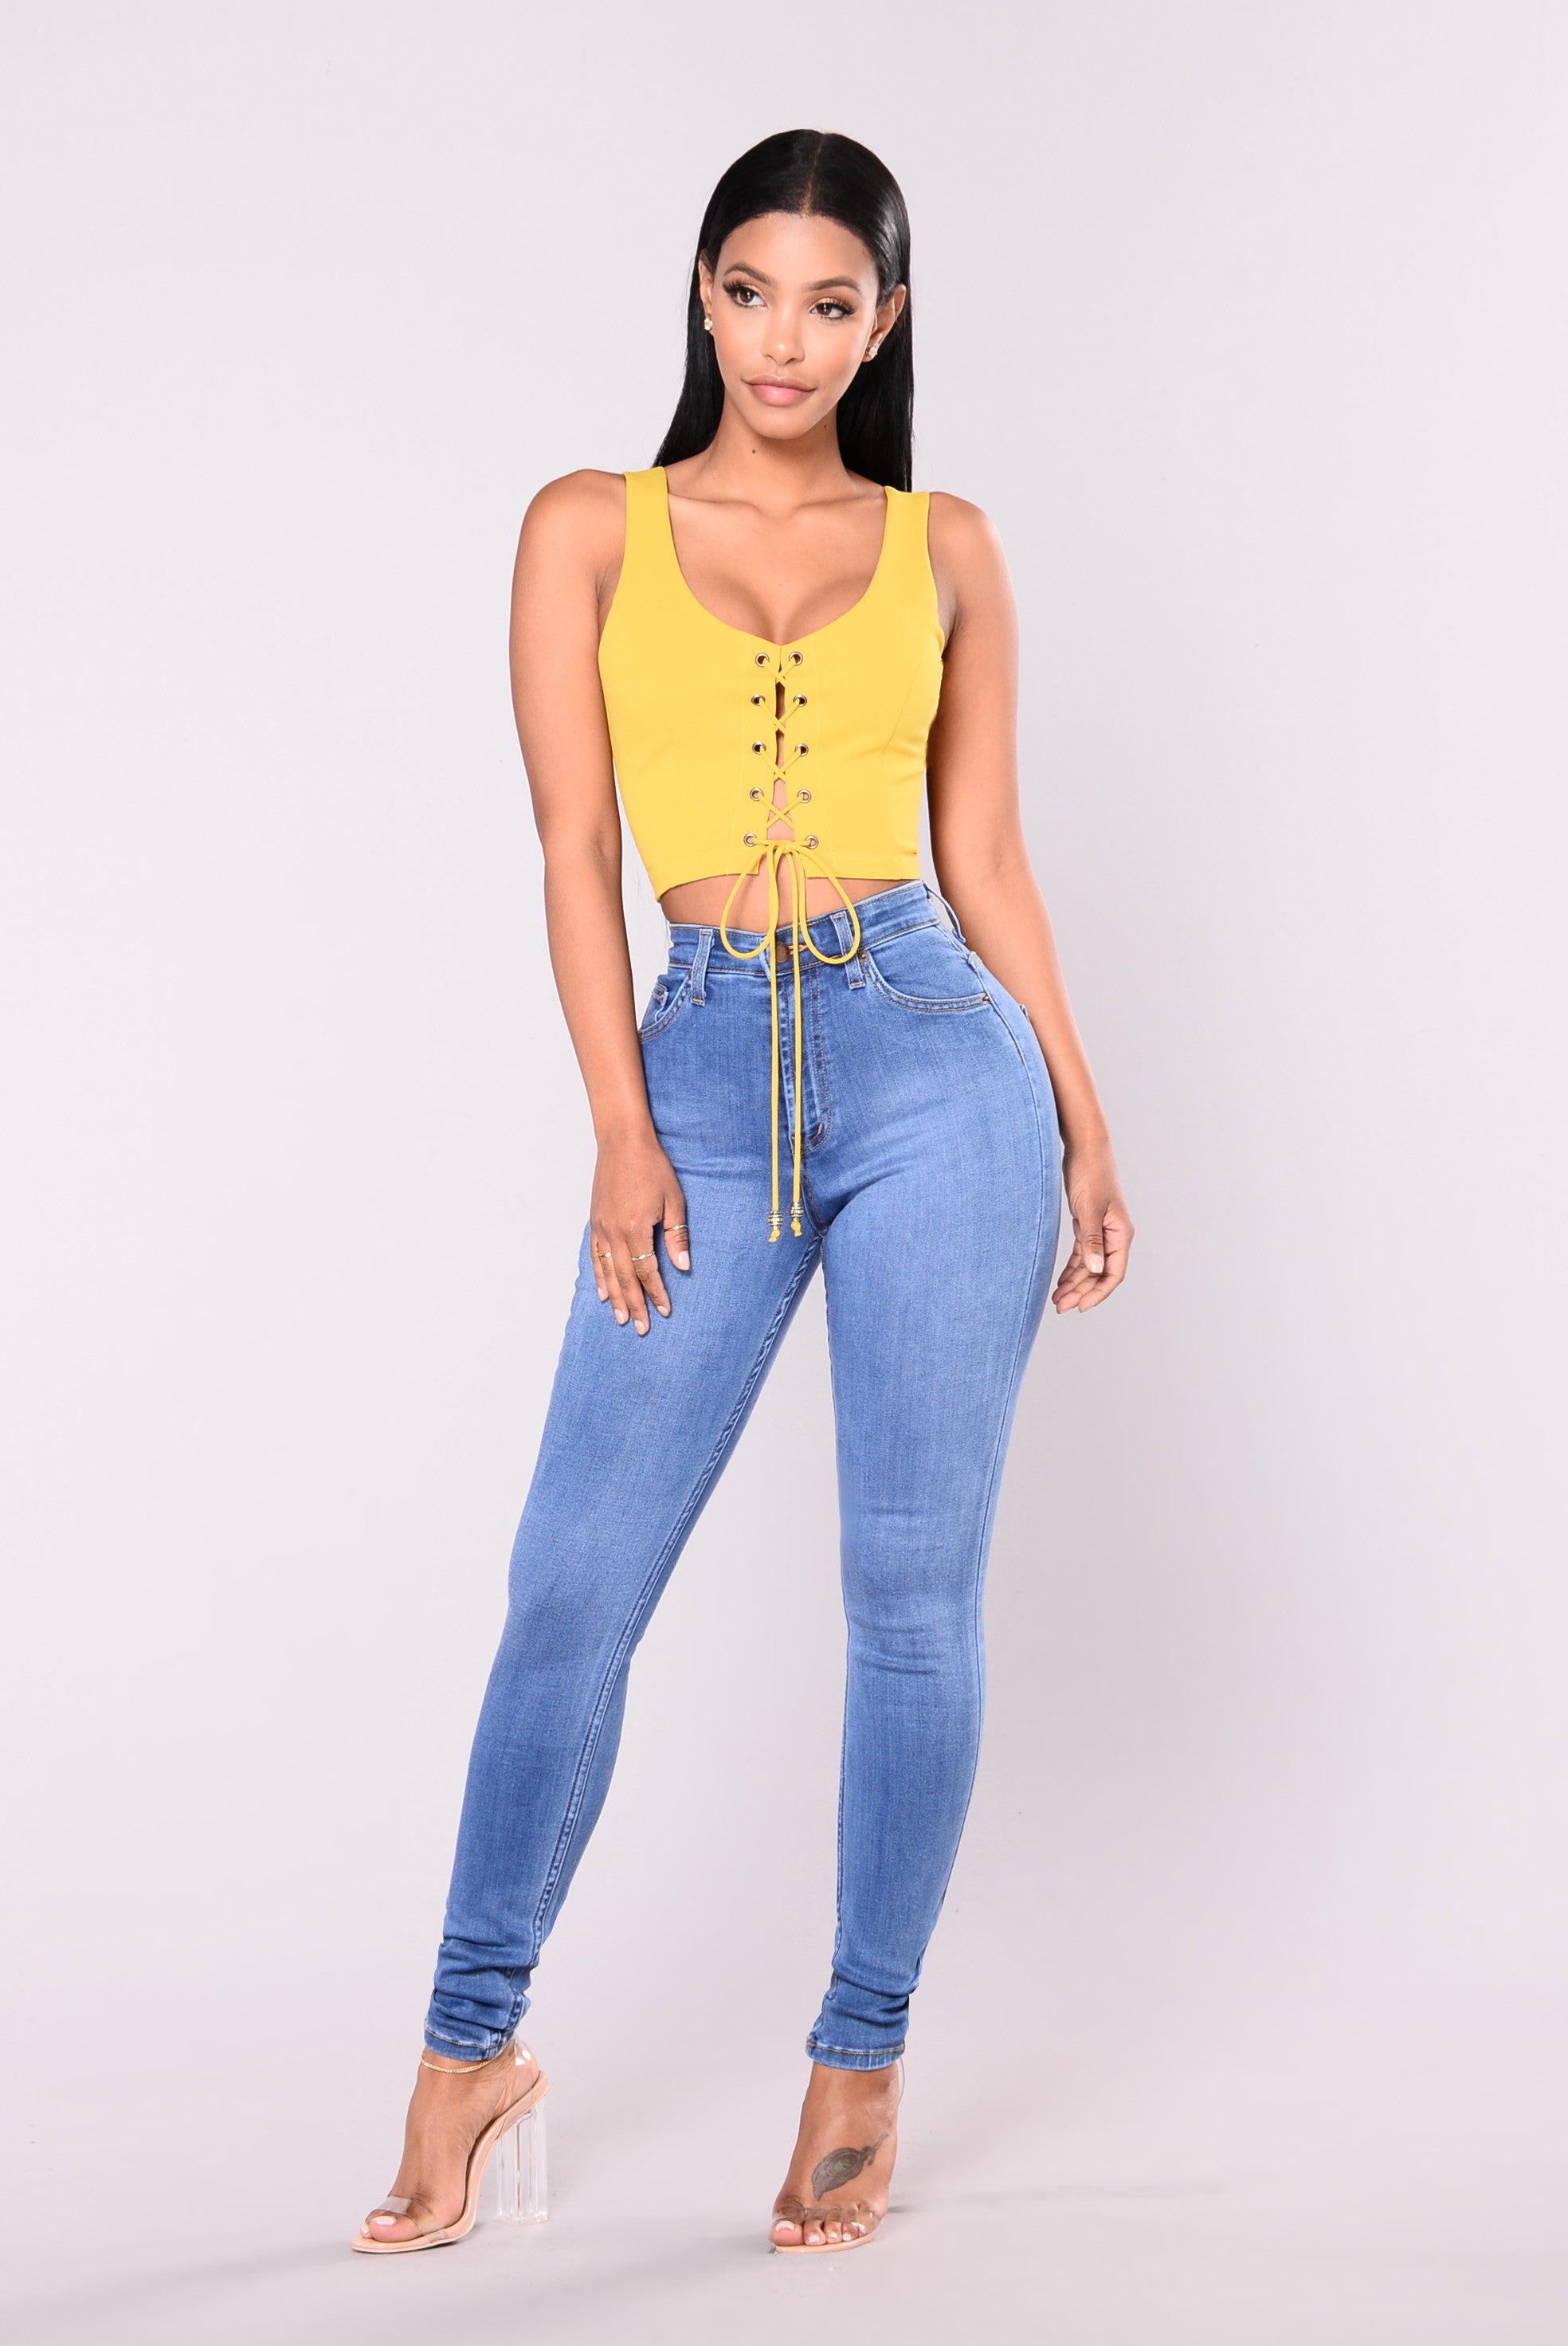 Mens high waisted jeans and crop tops